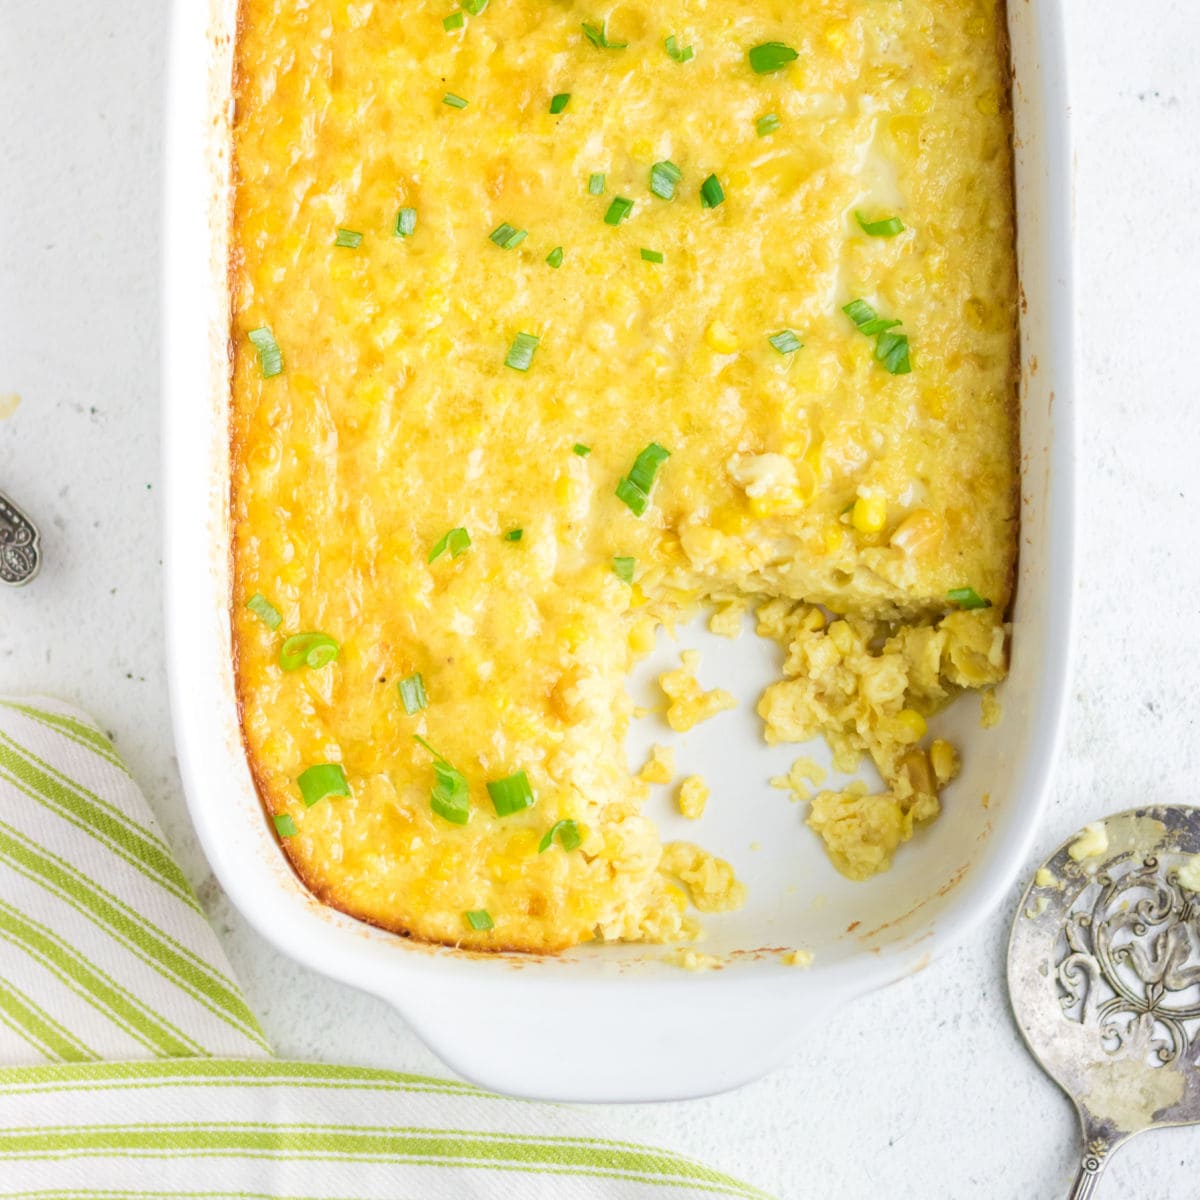 Overhead view of corn pudding in a casserole dish.